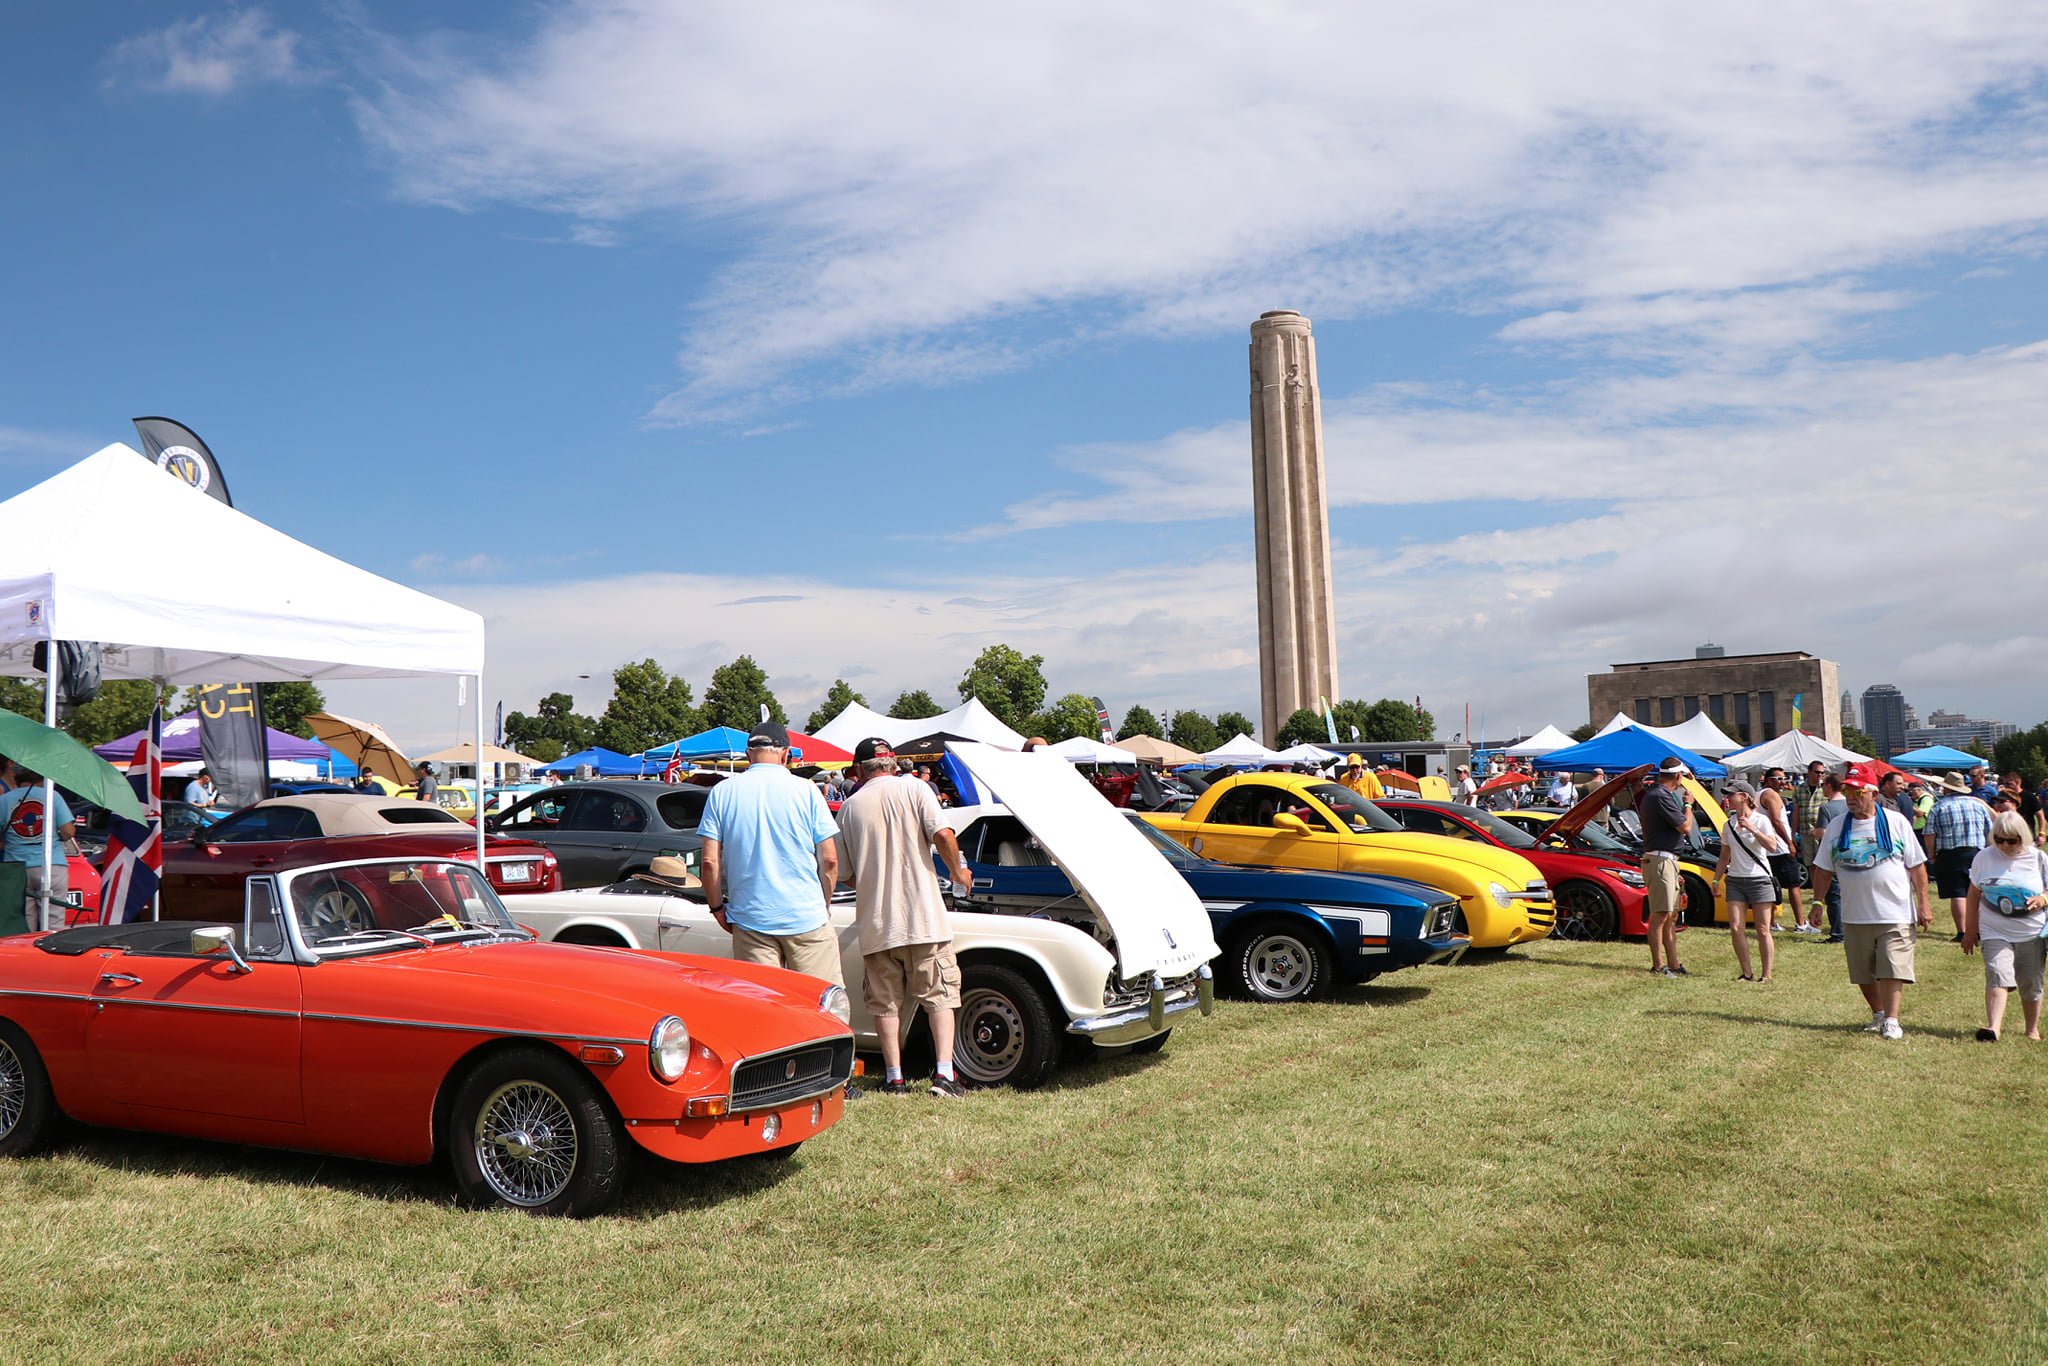 The Great Car Show returns for its fifth year this Sunday